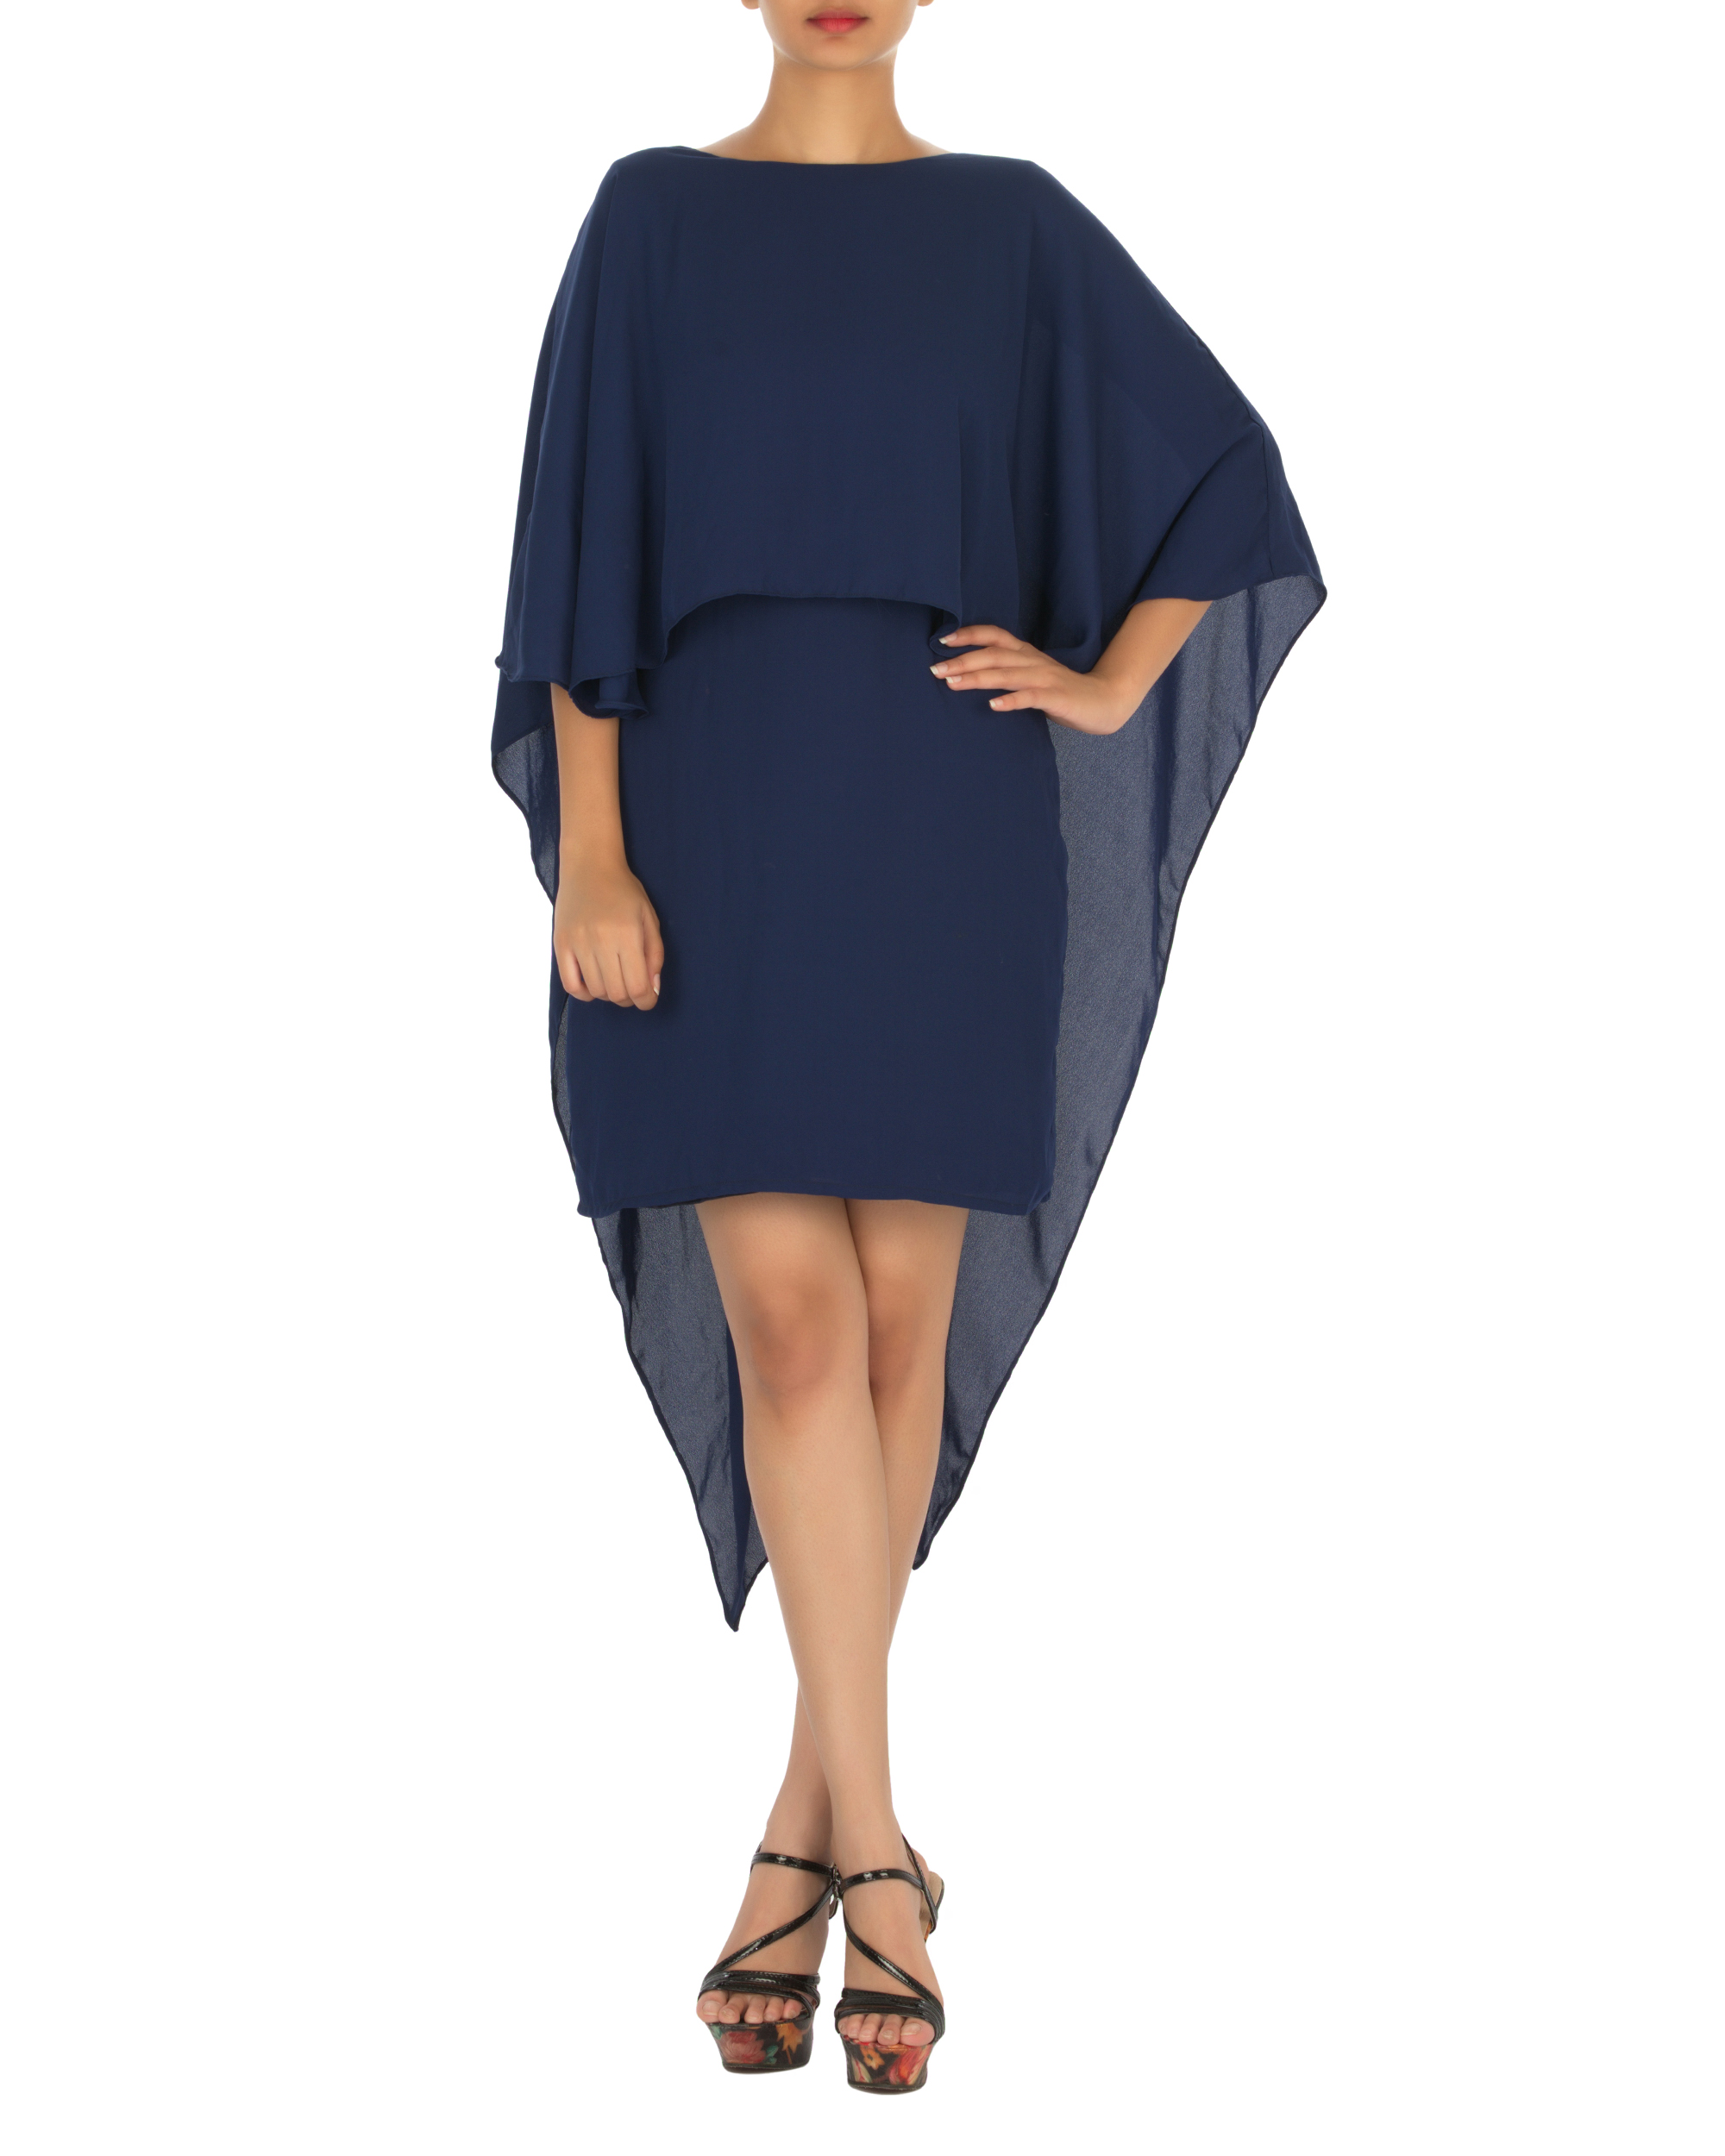 Ariel cape dress navy by Nay-Ked | The Secret Label